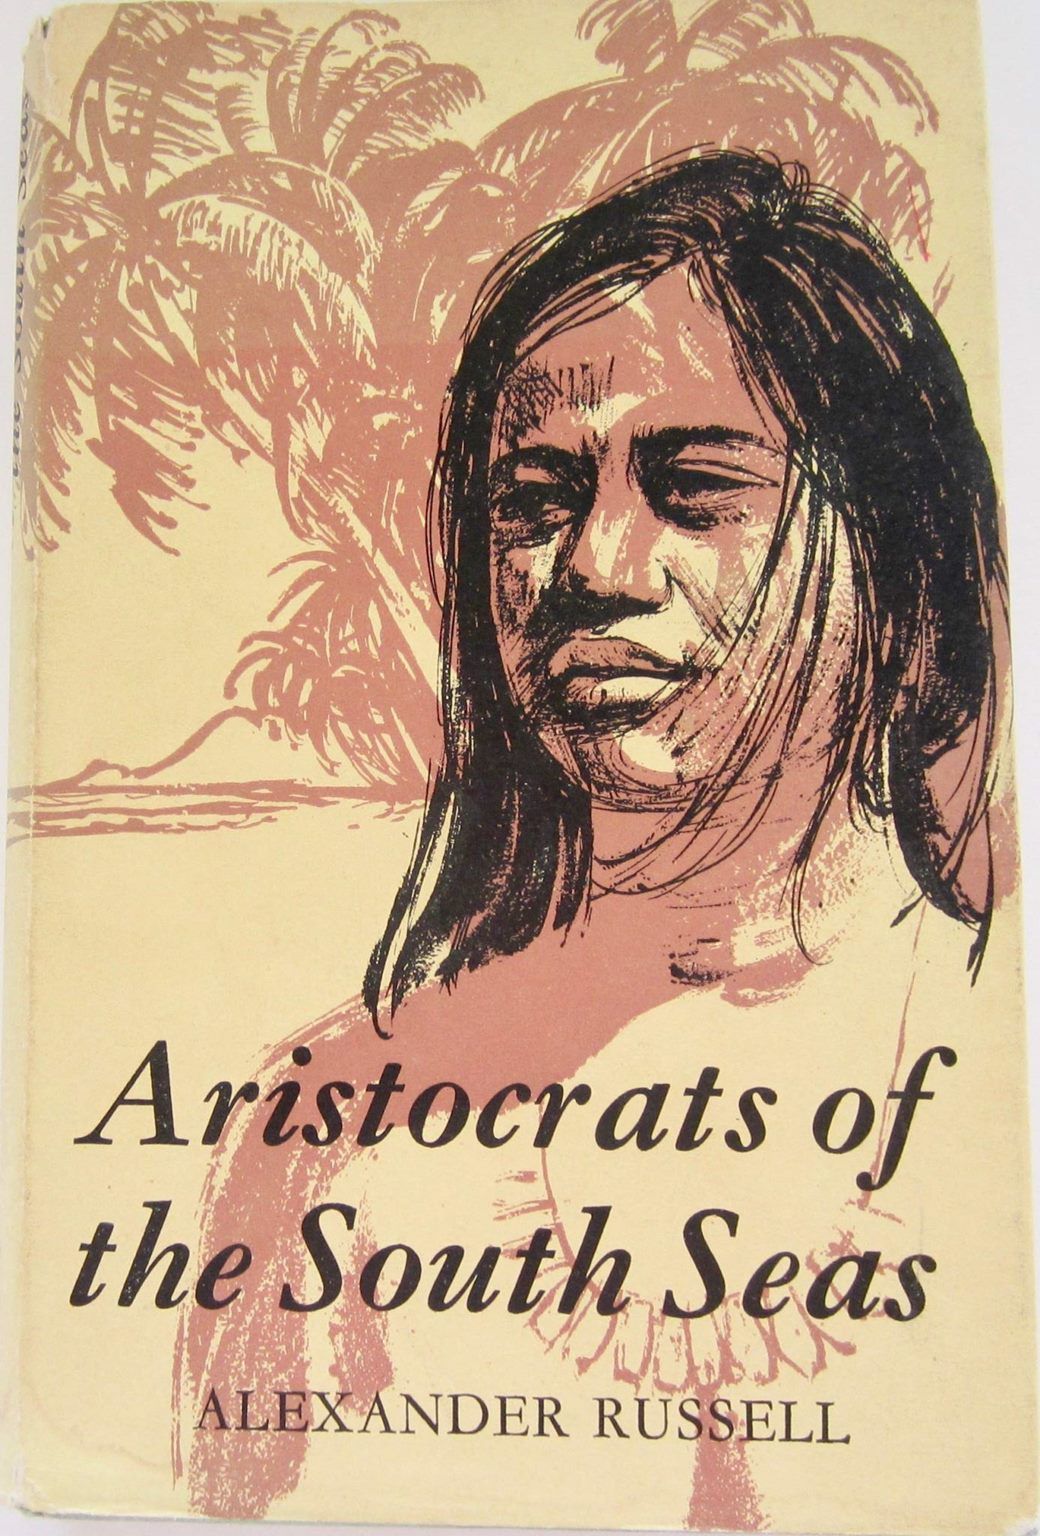 ARISTOCRATS OF THE SOUTH SEAS